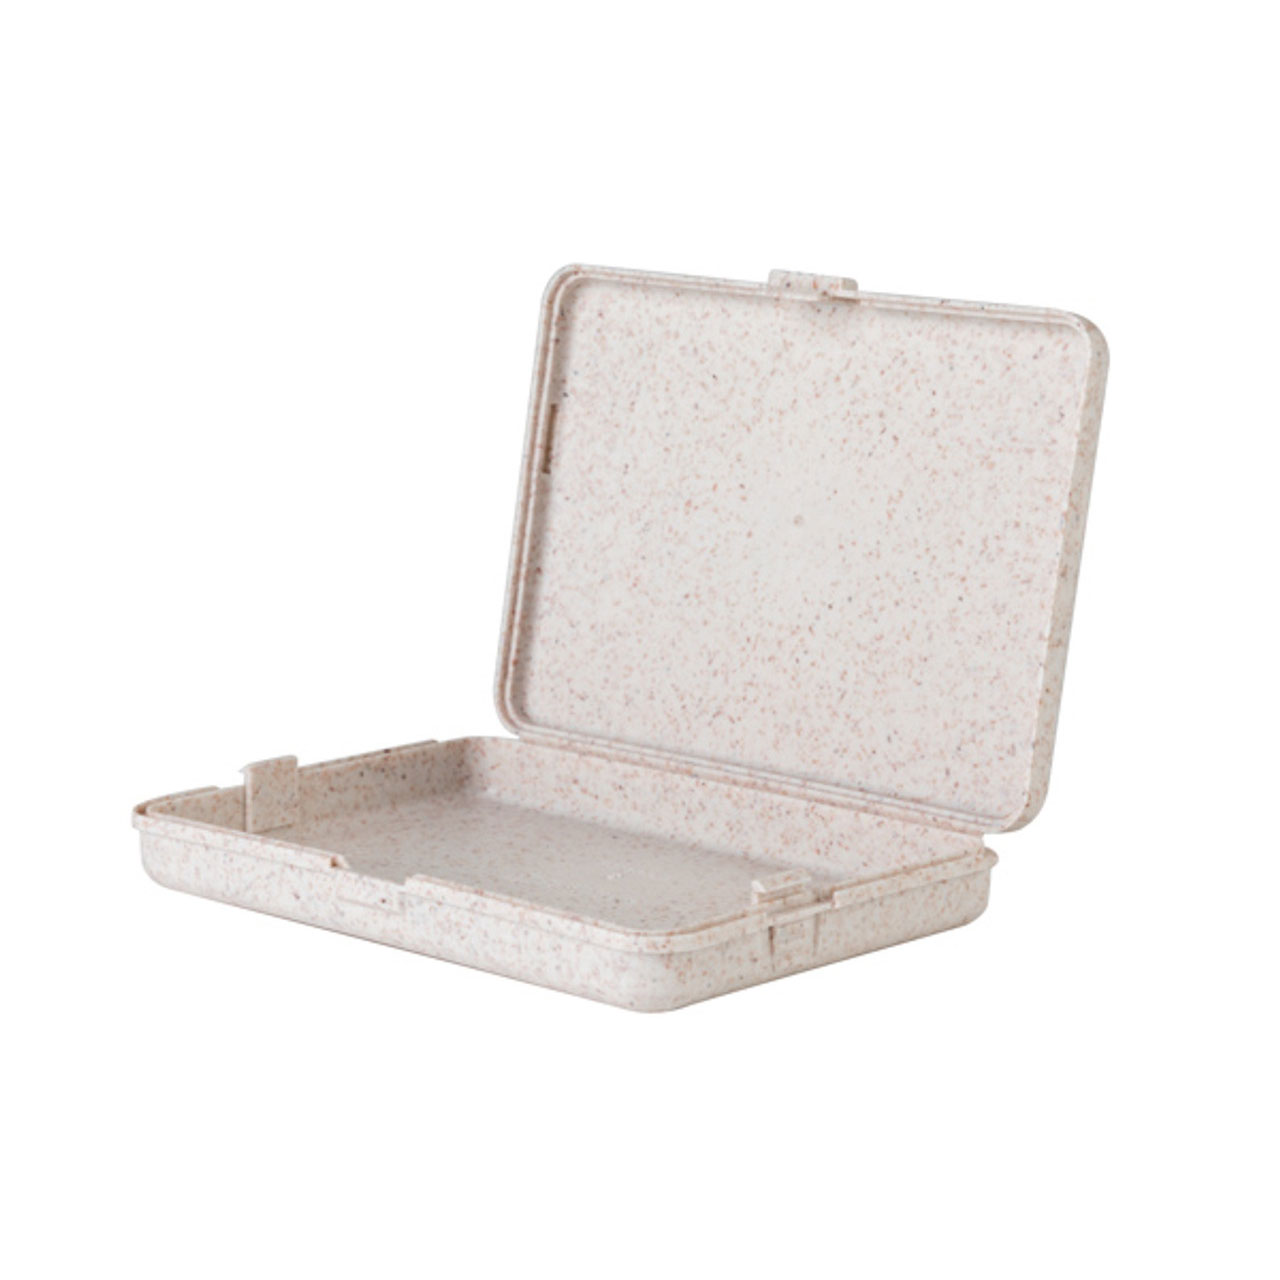 Cannasupplies Plant-Based CR Clamshell case for prerolls, vape carts, and more